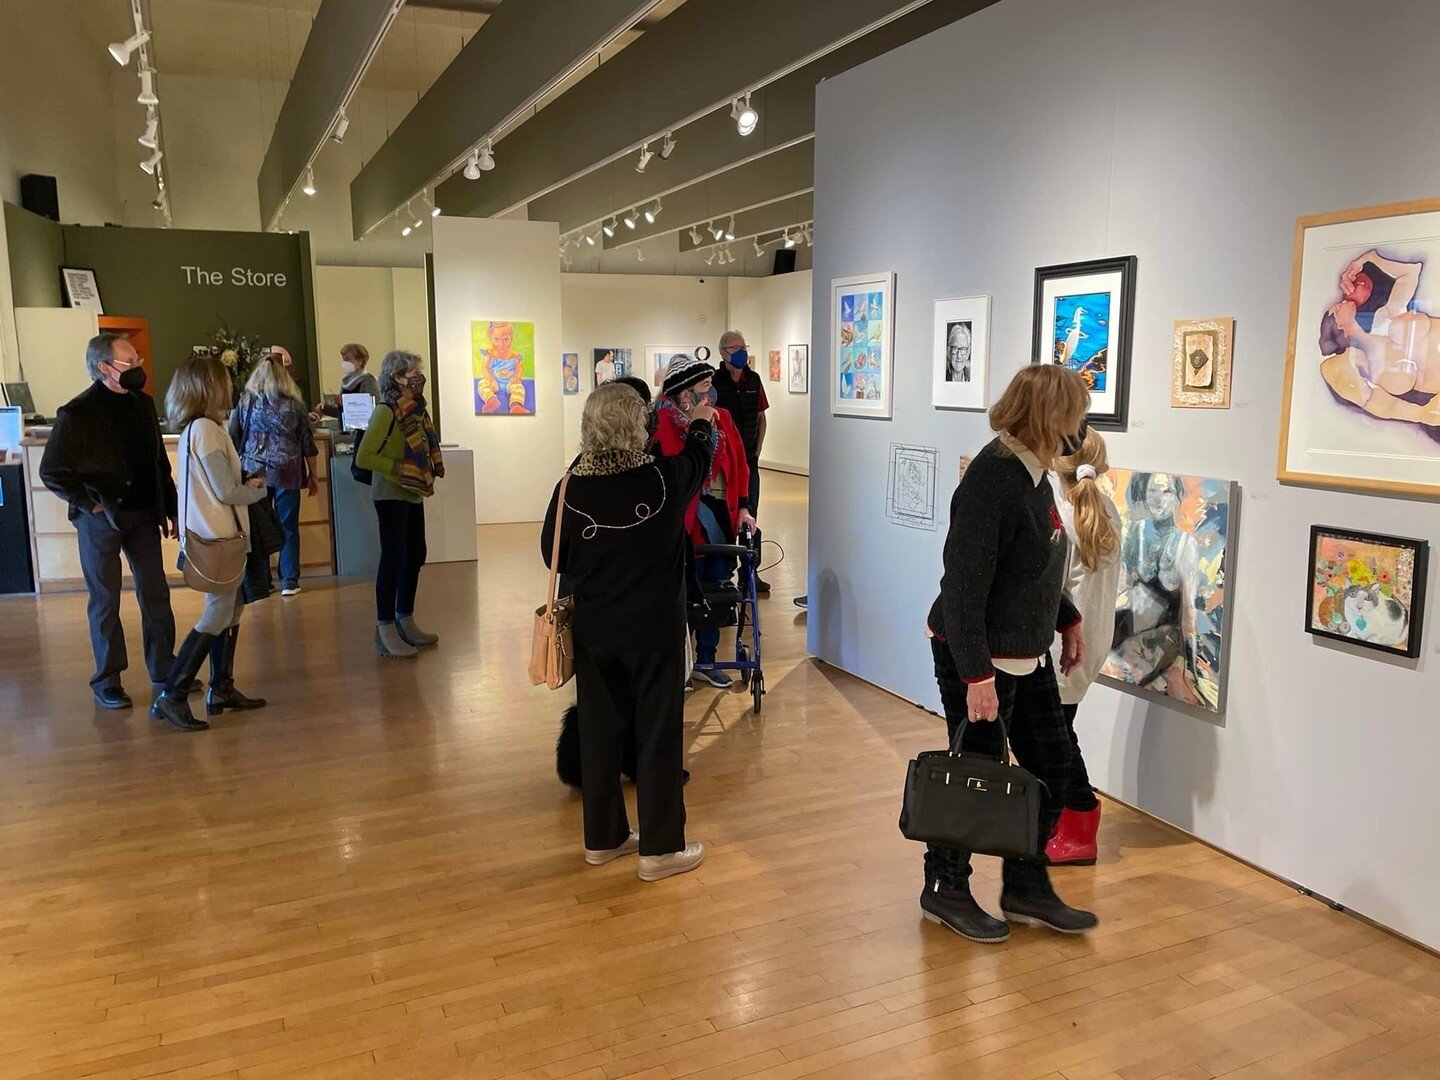 Please join us this afternoon for our @ArtattheSource Preview Exhibit opening reception between 2-4pm. We've got another incredible lineup of artists that will open their studios on the weekends of June 3-4 &amp; 10-22 from 10am-5pm and you can see a